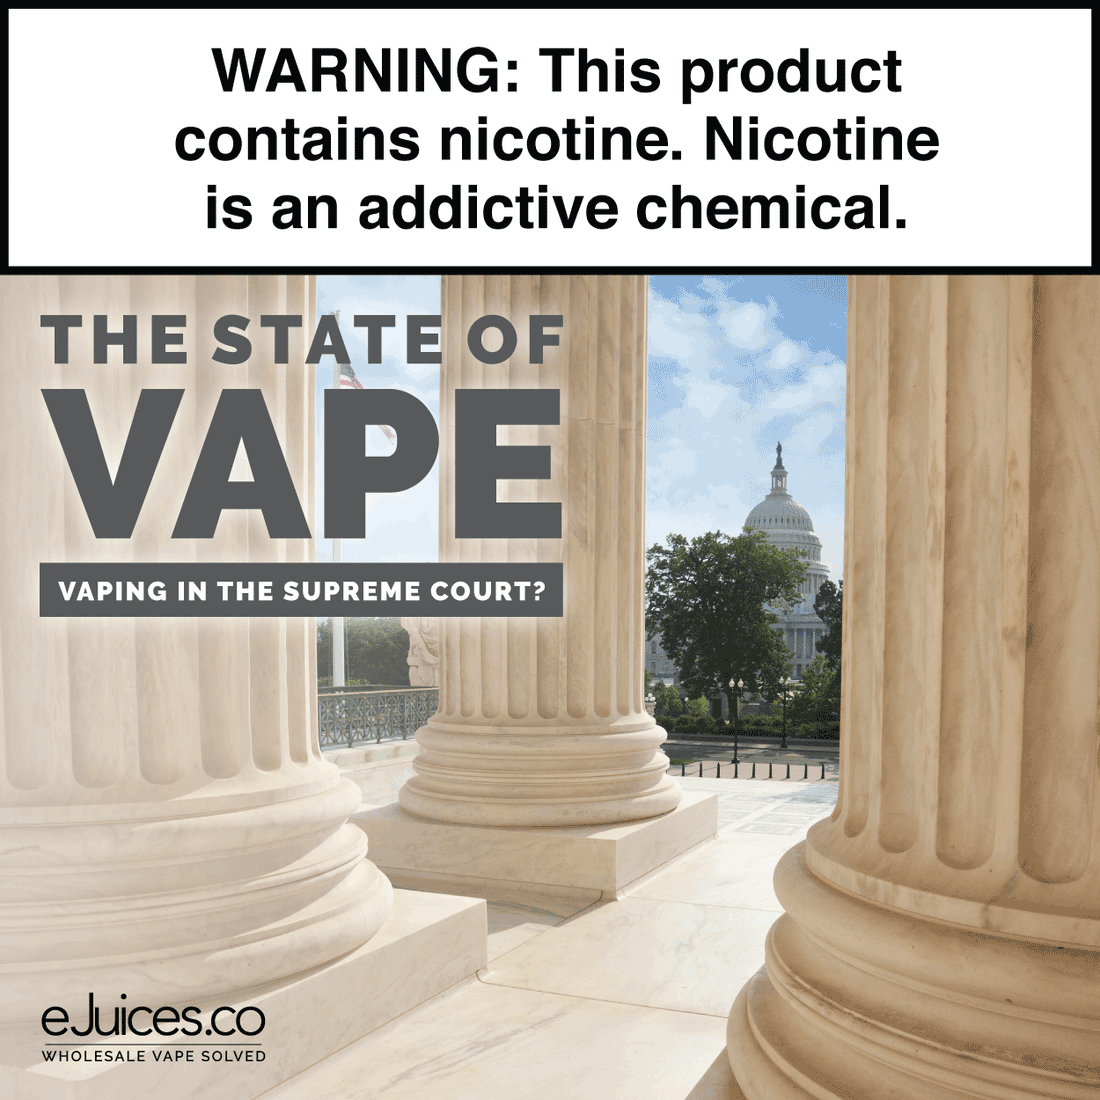 State of Vape: Vaping in the Supreme Court?